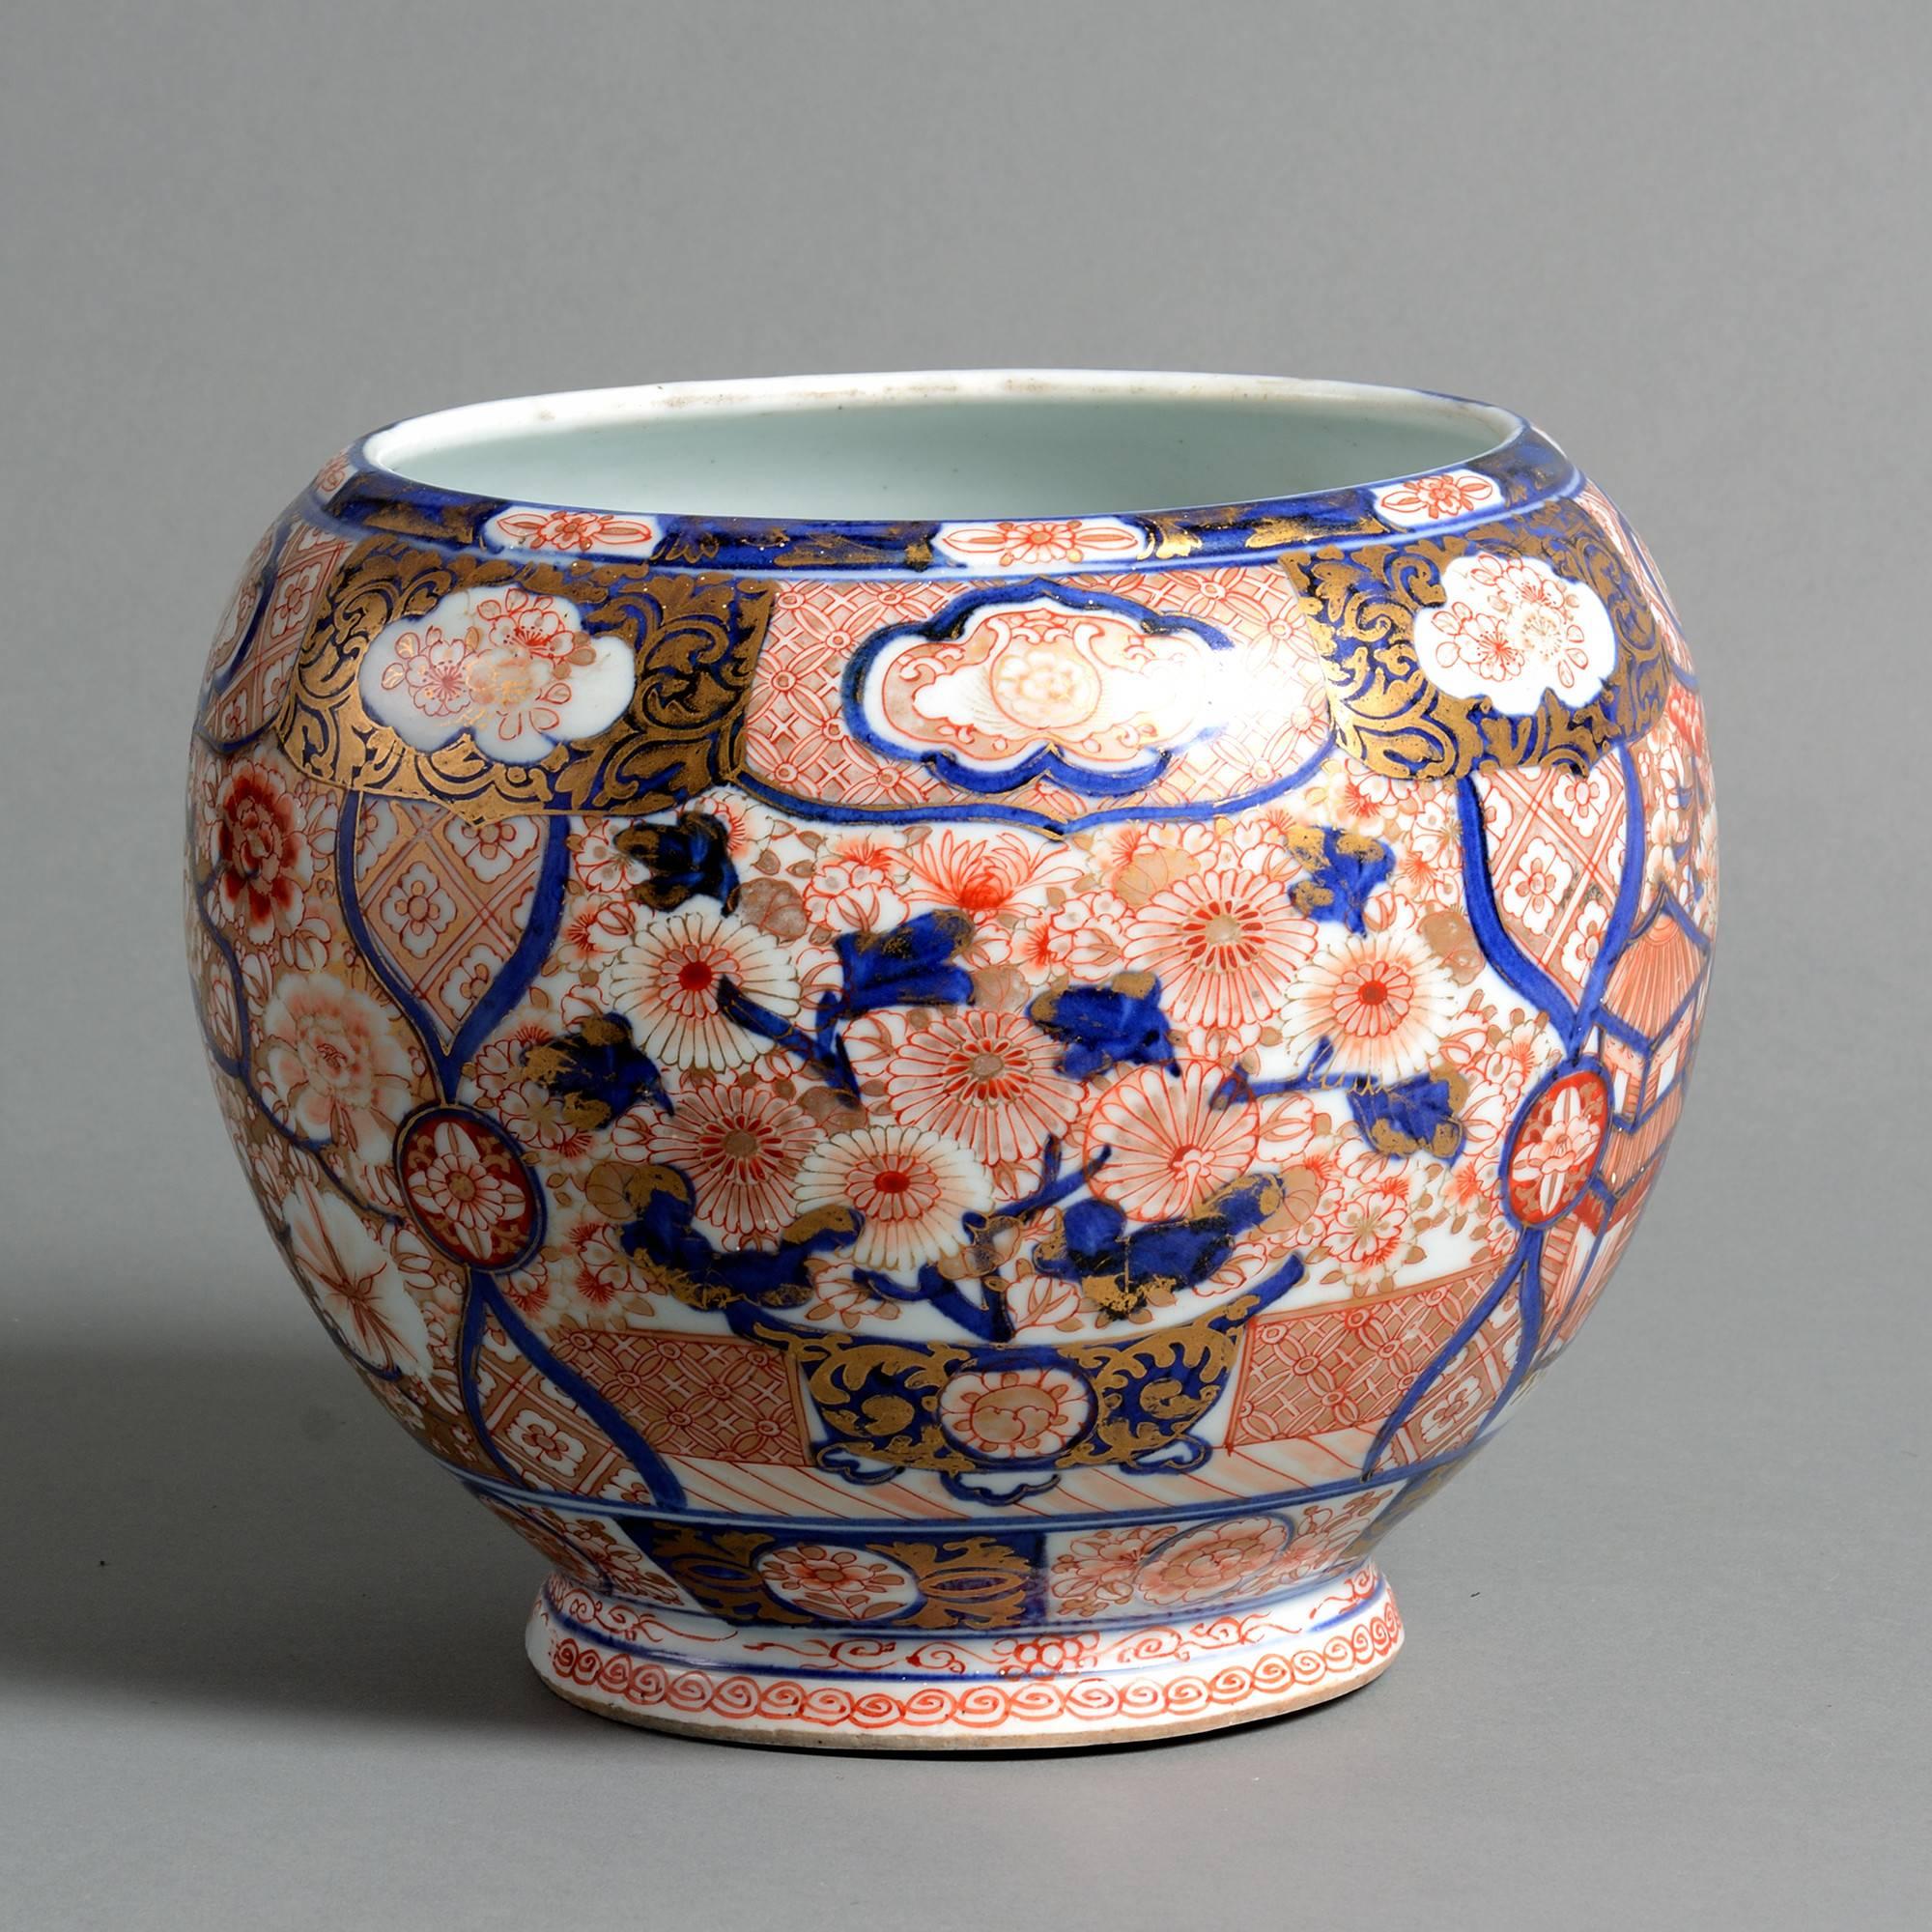 A late 19th century Imari porcelain jardiniere or planter, decorated in the traditional manner in red, blue and gilded glazes upon a white ground.

Meiji period (1868-1912).